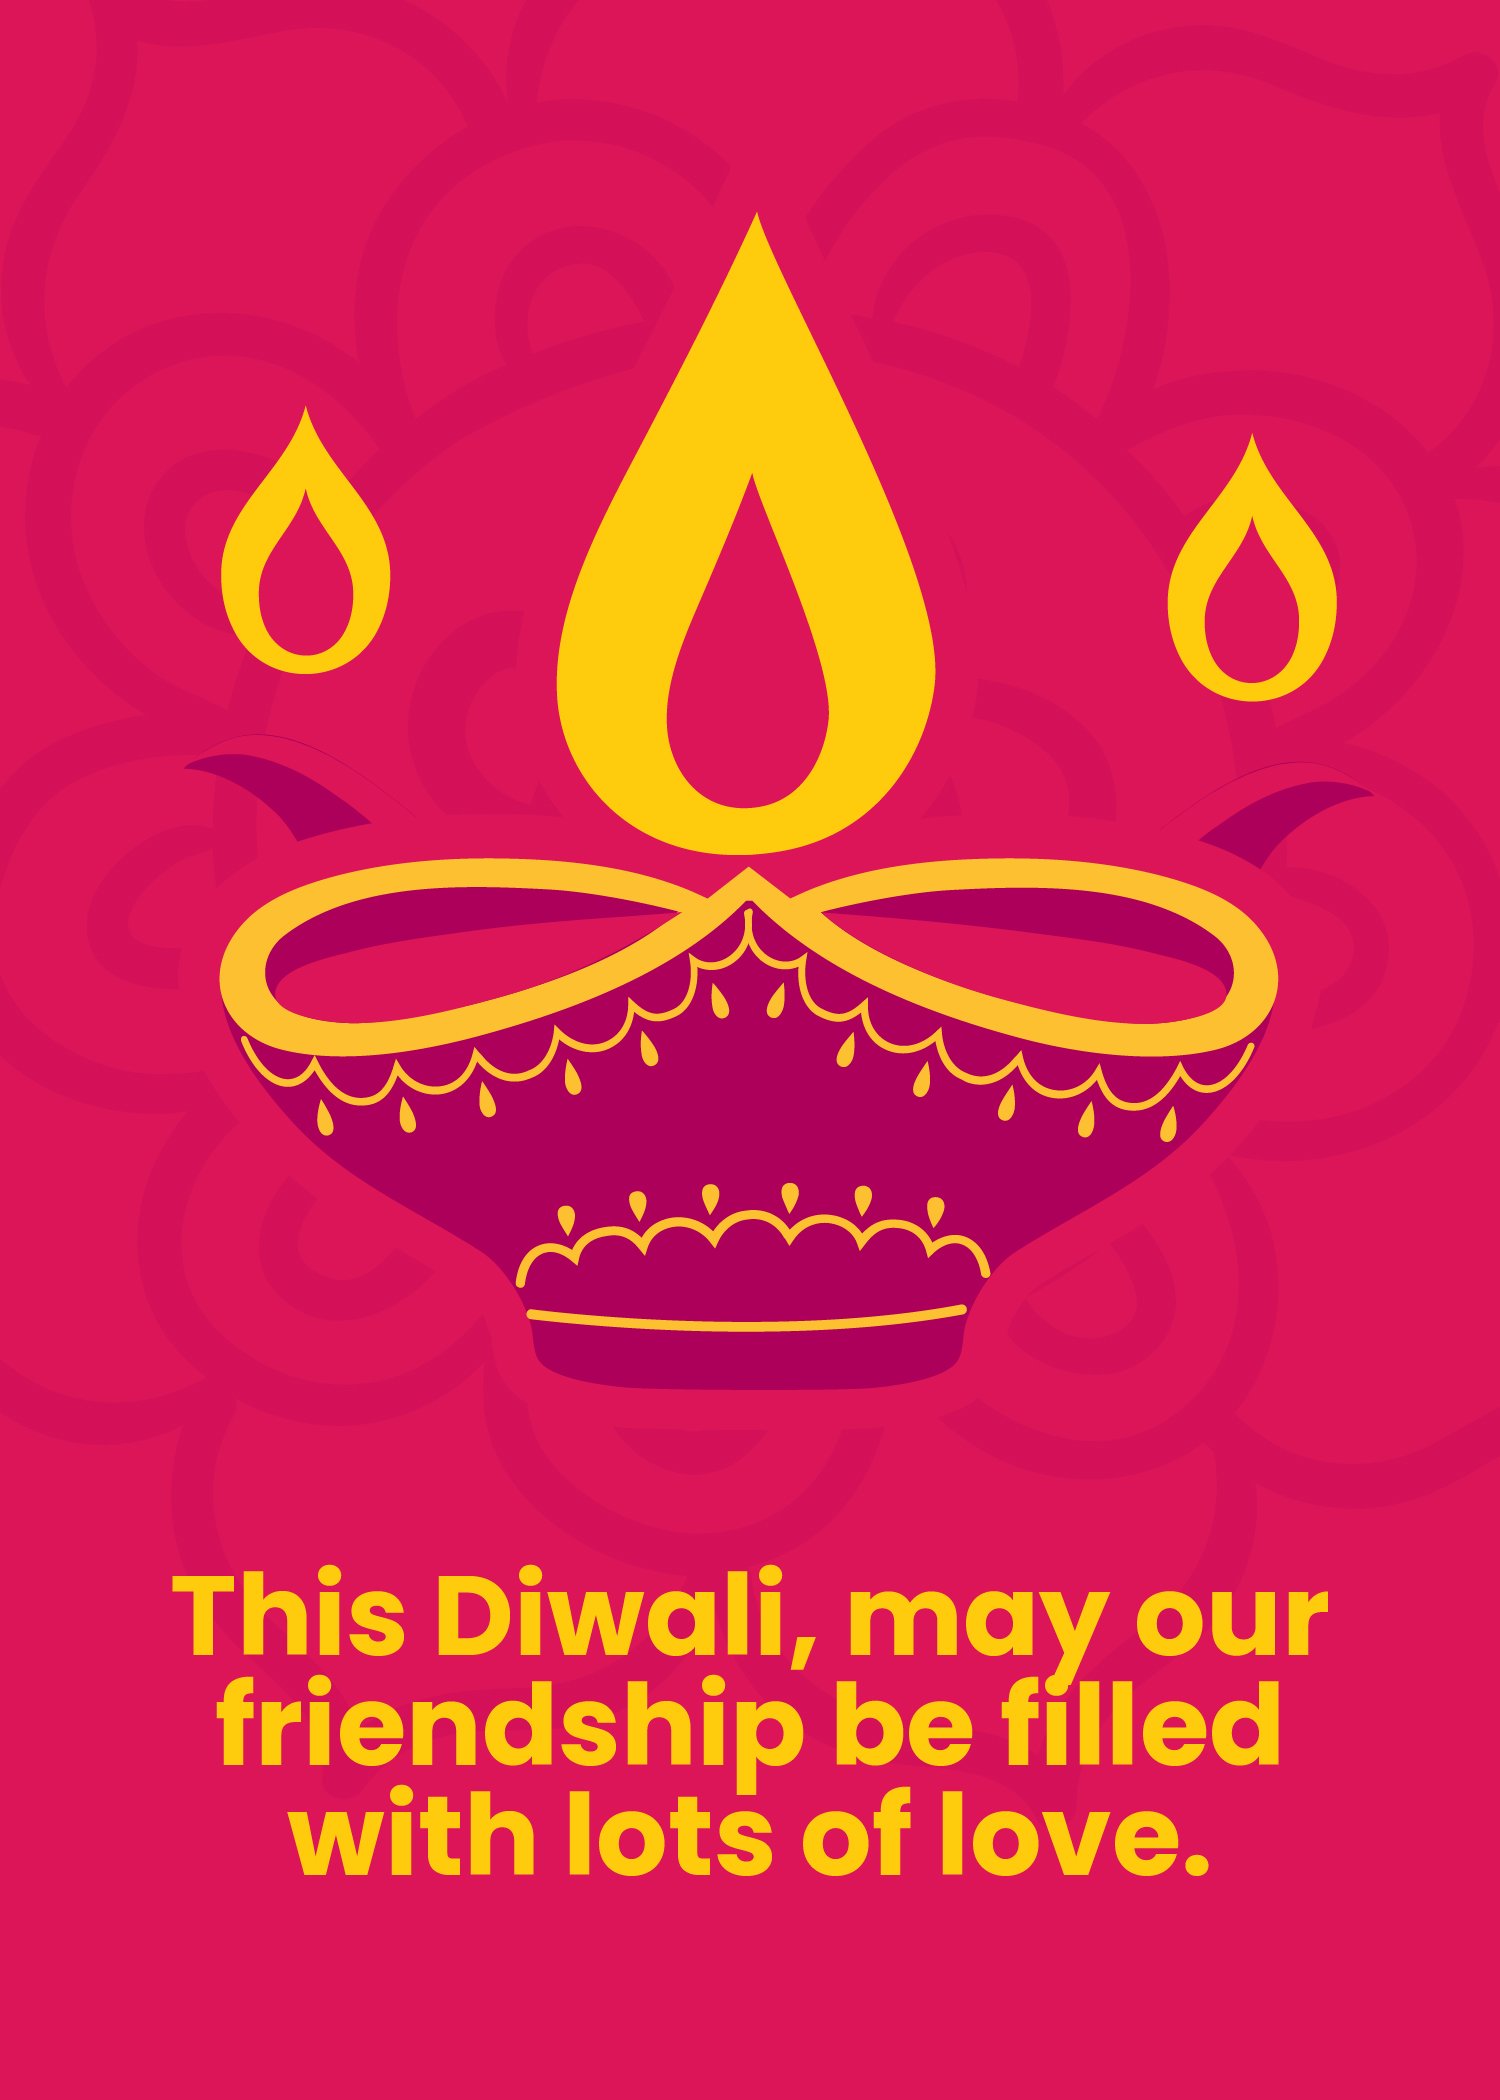 Free Diwali Wishes For Friend in Word, Google Docs, Illustrator, PSD, Apple Pages, Publisher, EPS, SVG, JPG, PNG